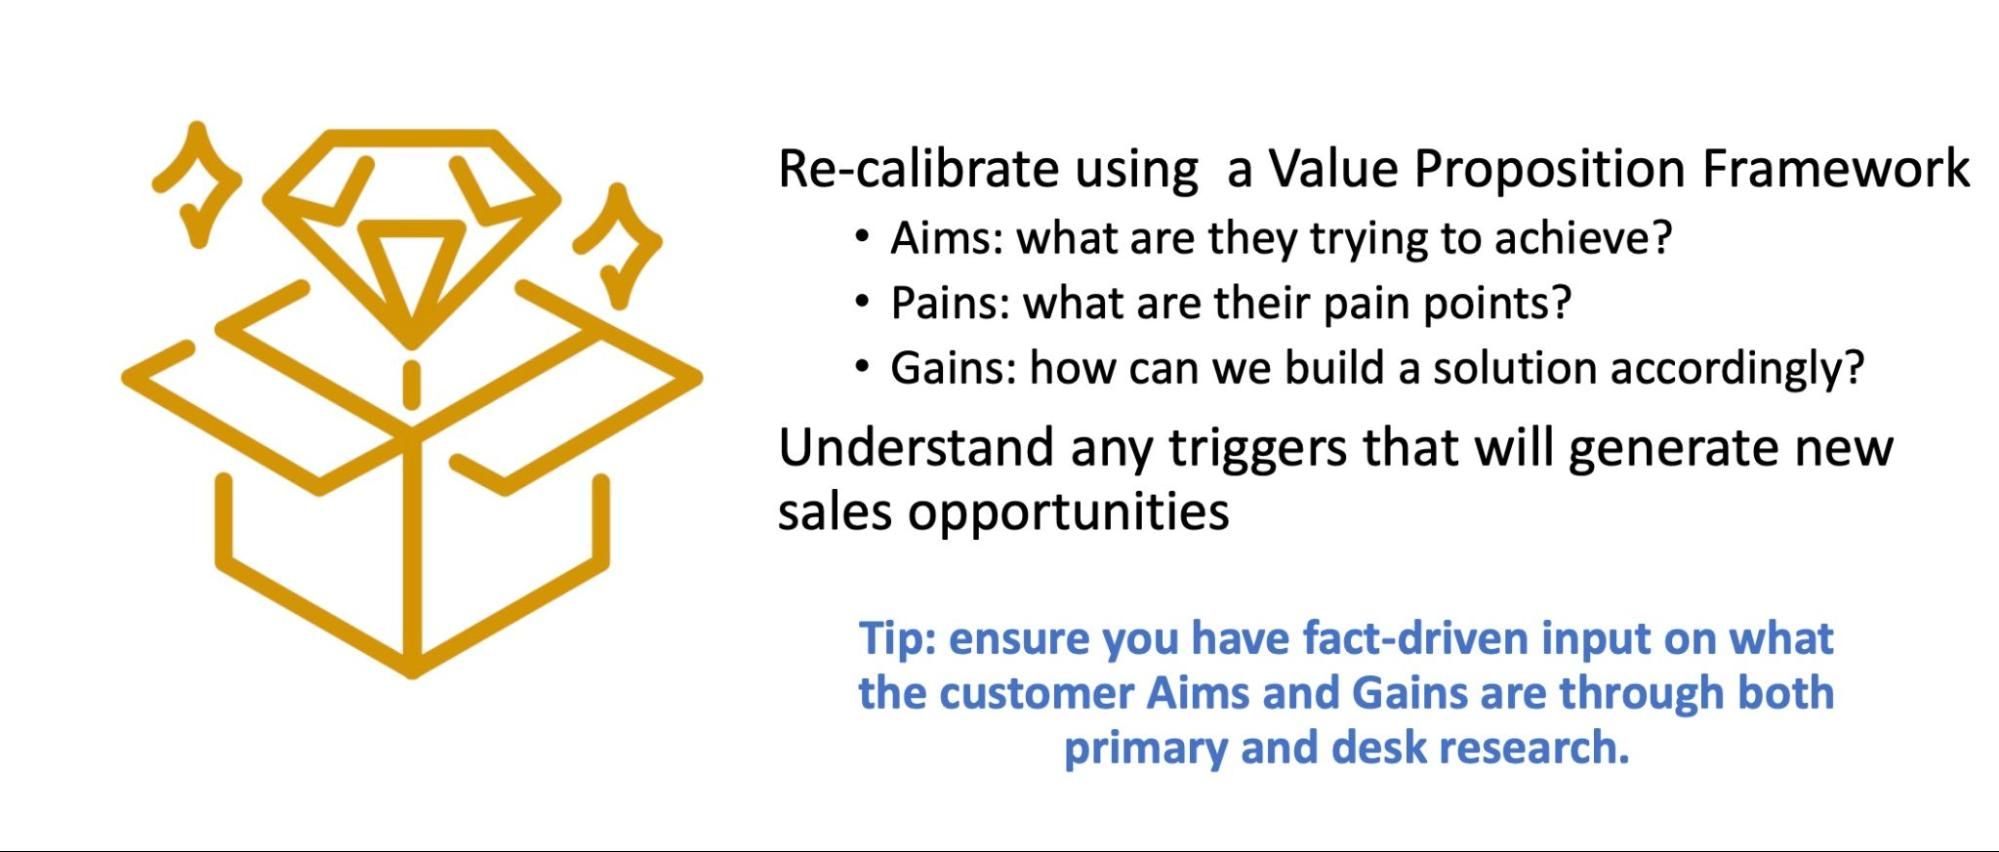 re-calibrate using a value proposition framework